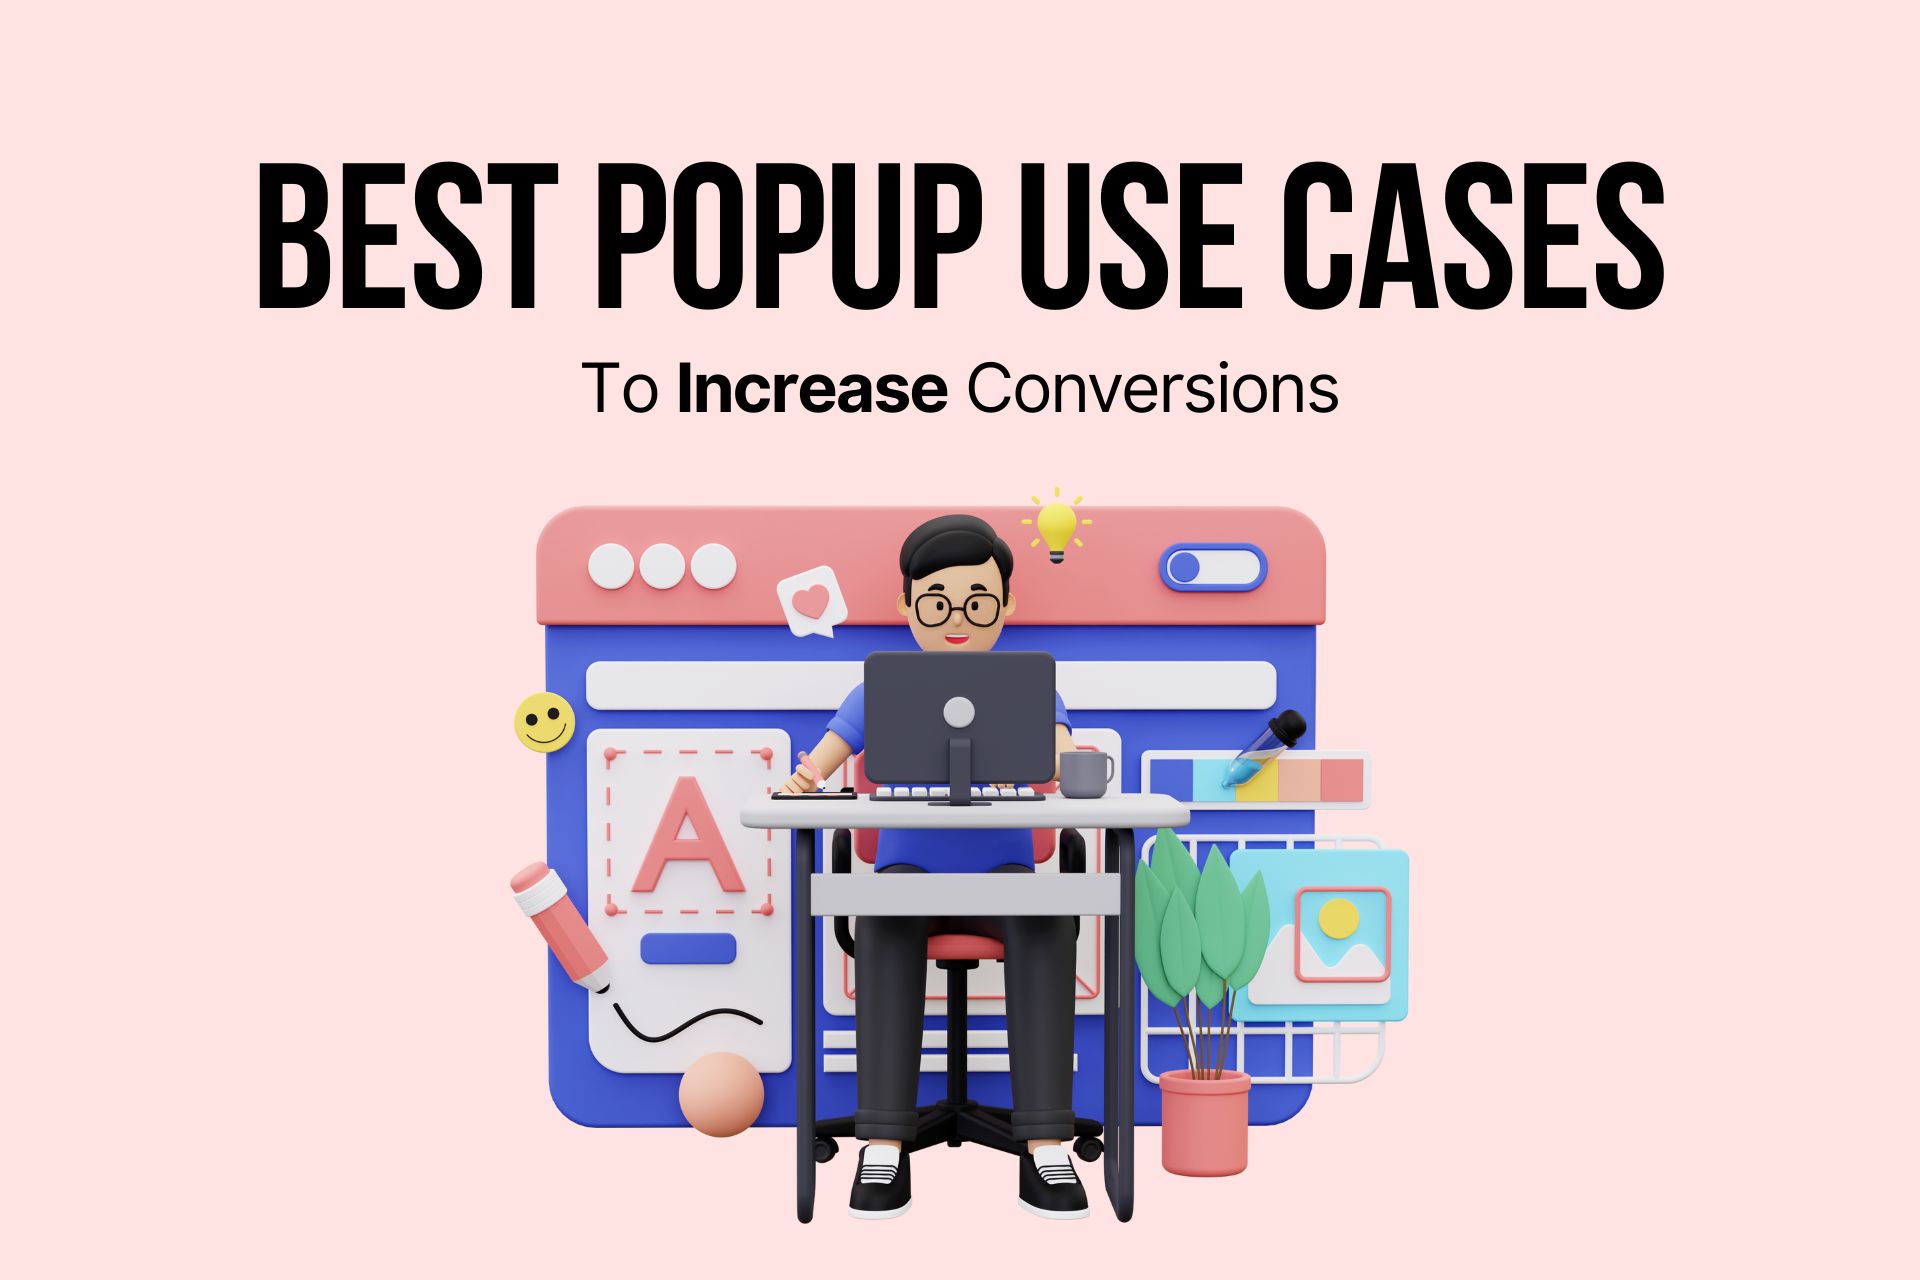 Top 13 Popup Use Cases To Increase Conversions